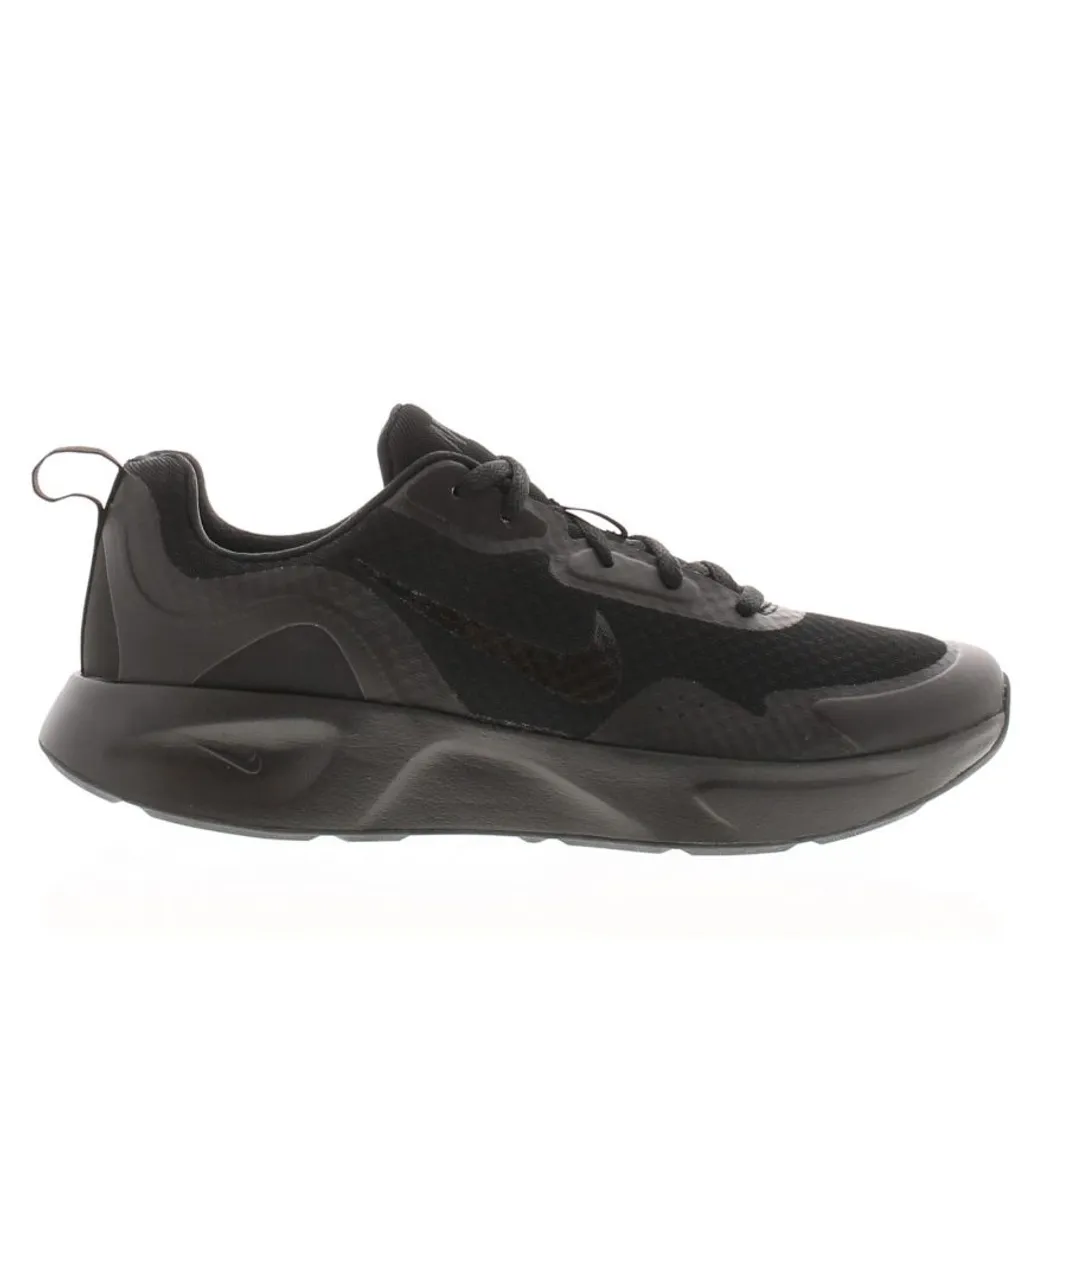 Nike Womens Chunky Trainers Wear All Day Lace Up black